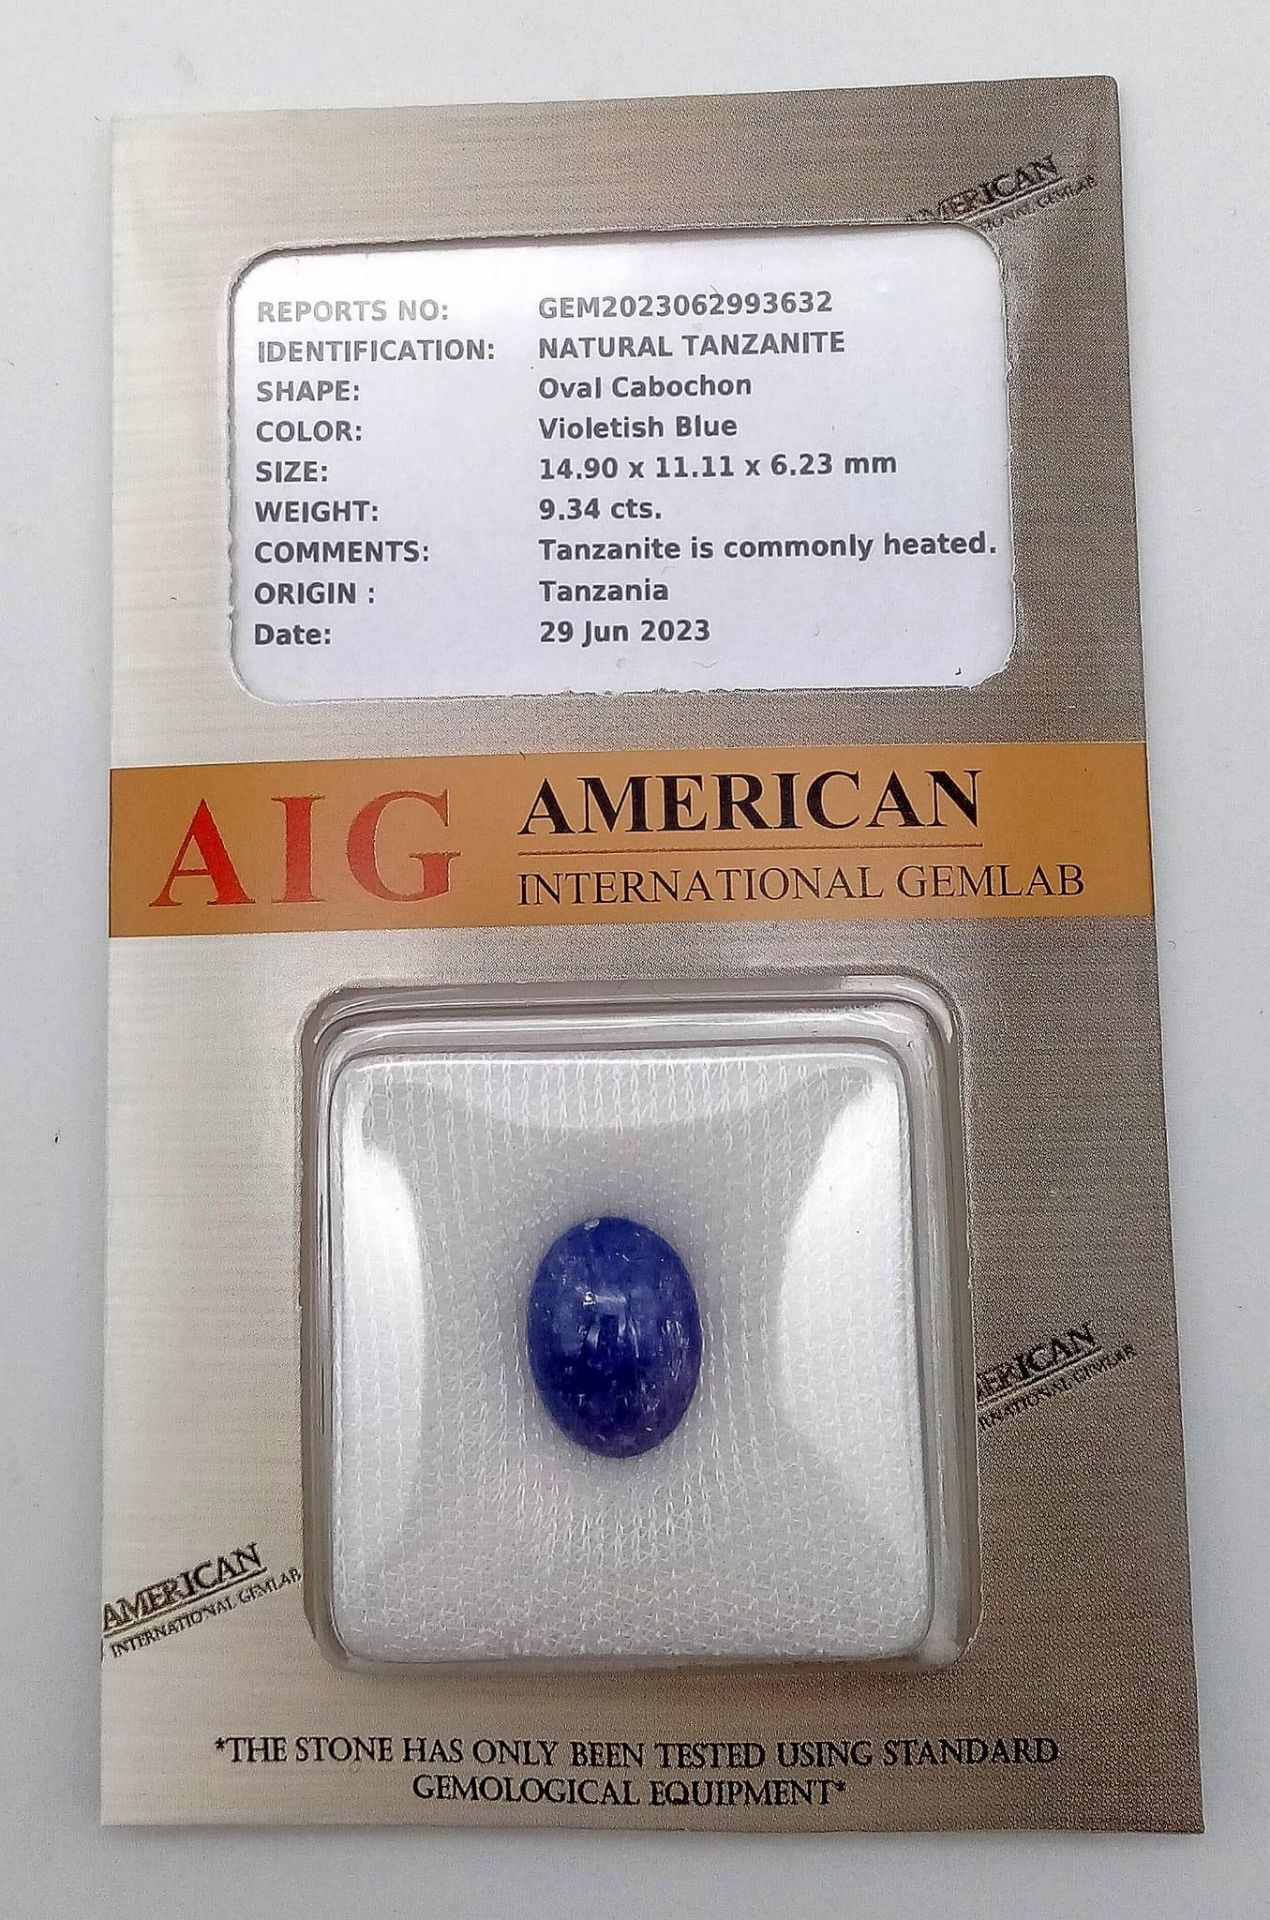 A 9.34ct Natural Tanzanite Cabochon - Sealed Container -AIG Certified. - Image 2 of 3